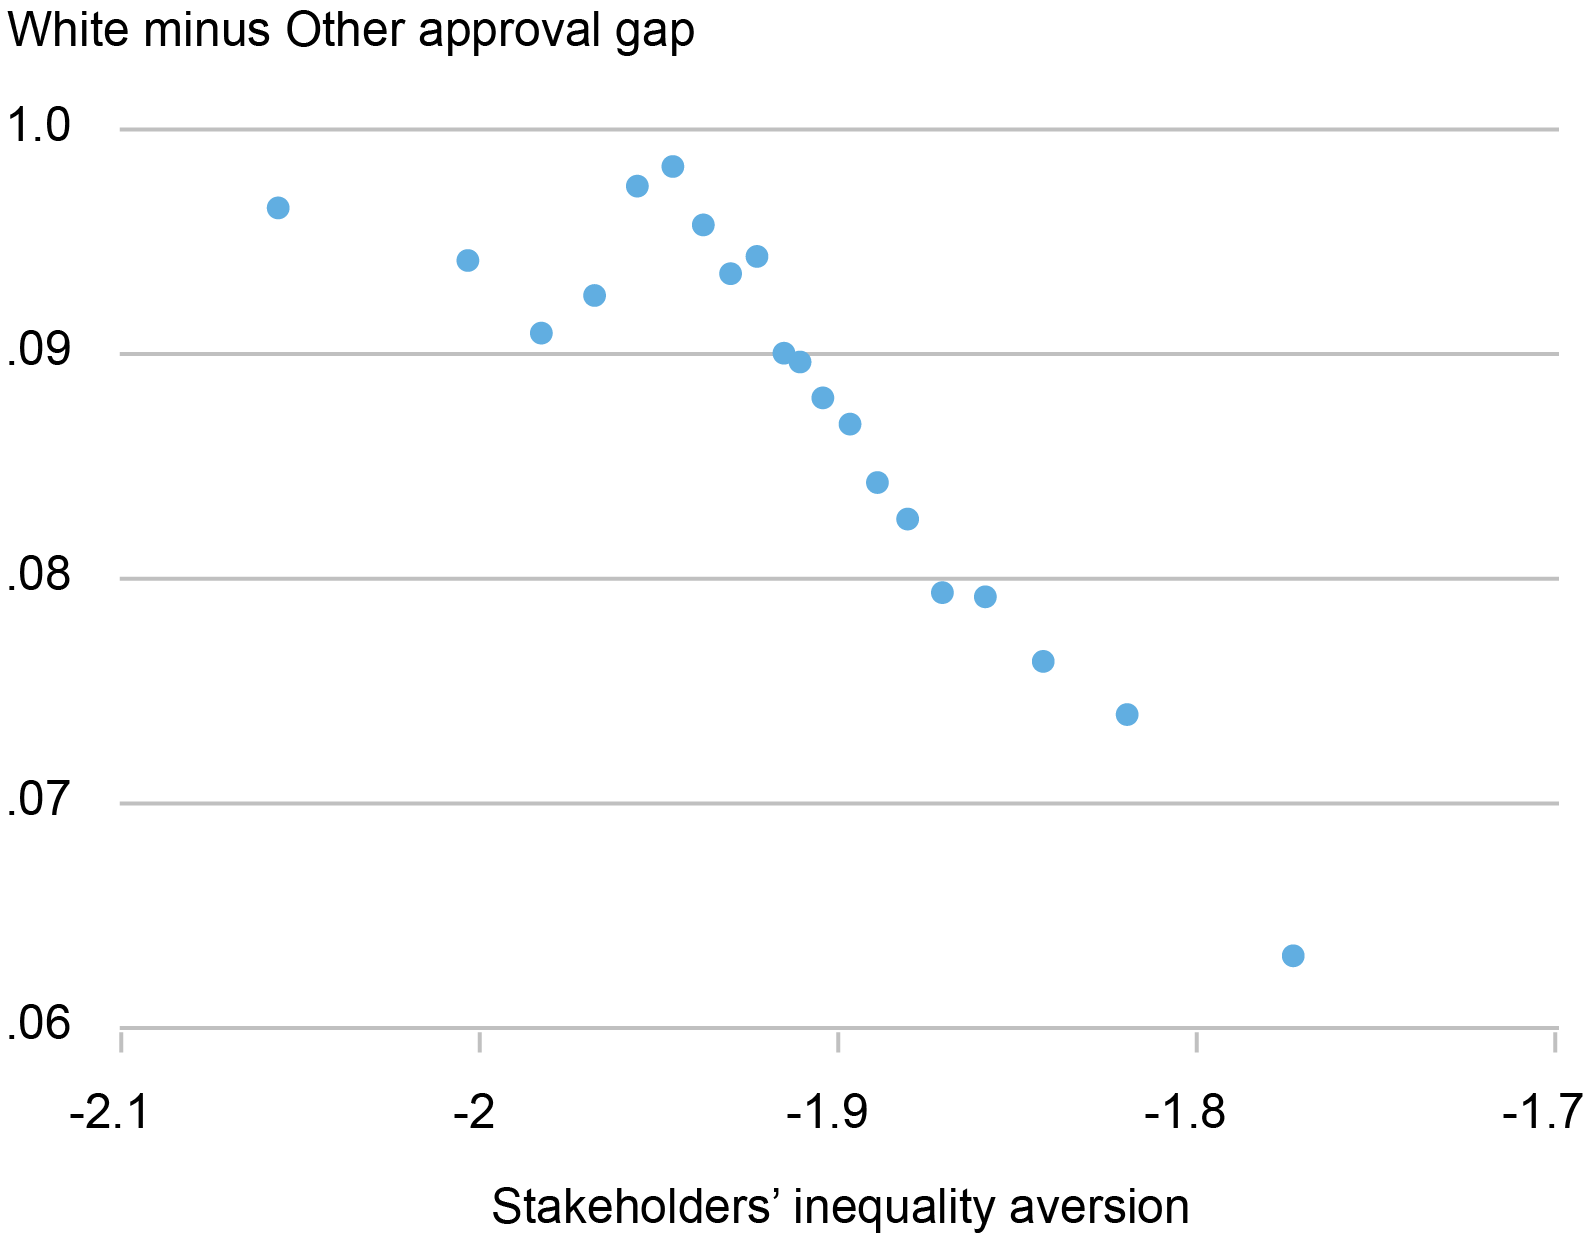 Liberty Street Economics binscatter chart that plots the approval gaps between white and non-white mortgage applicants on the y-axis versus the inequality aversion of banks’ stakeholders on the x-axis. Smaller approval gaps are associated with more inequality aversion.